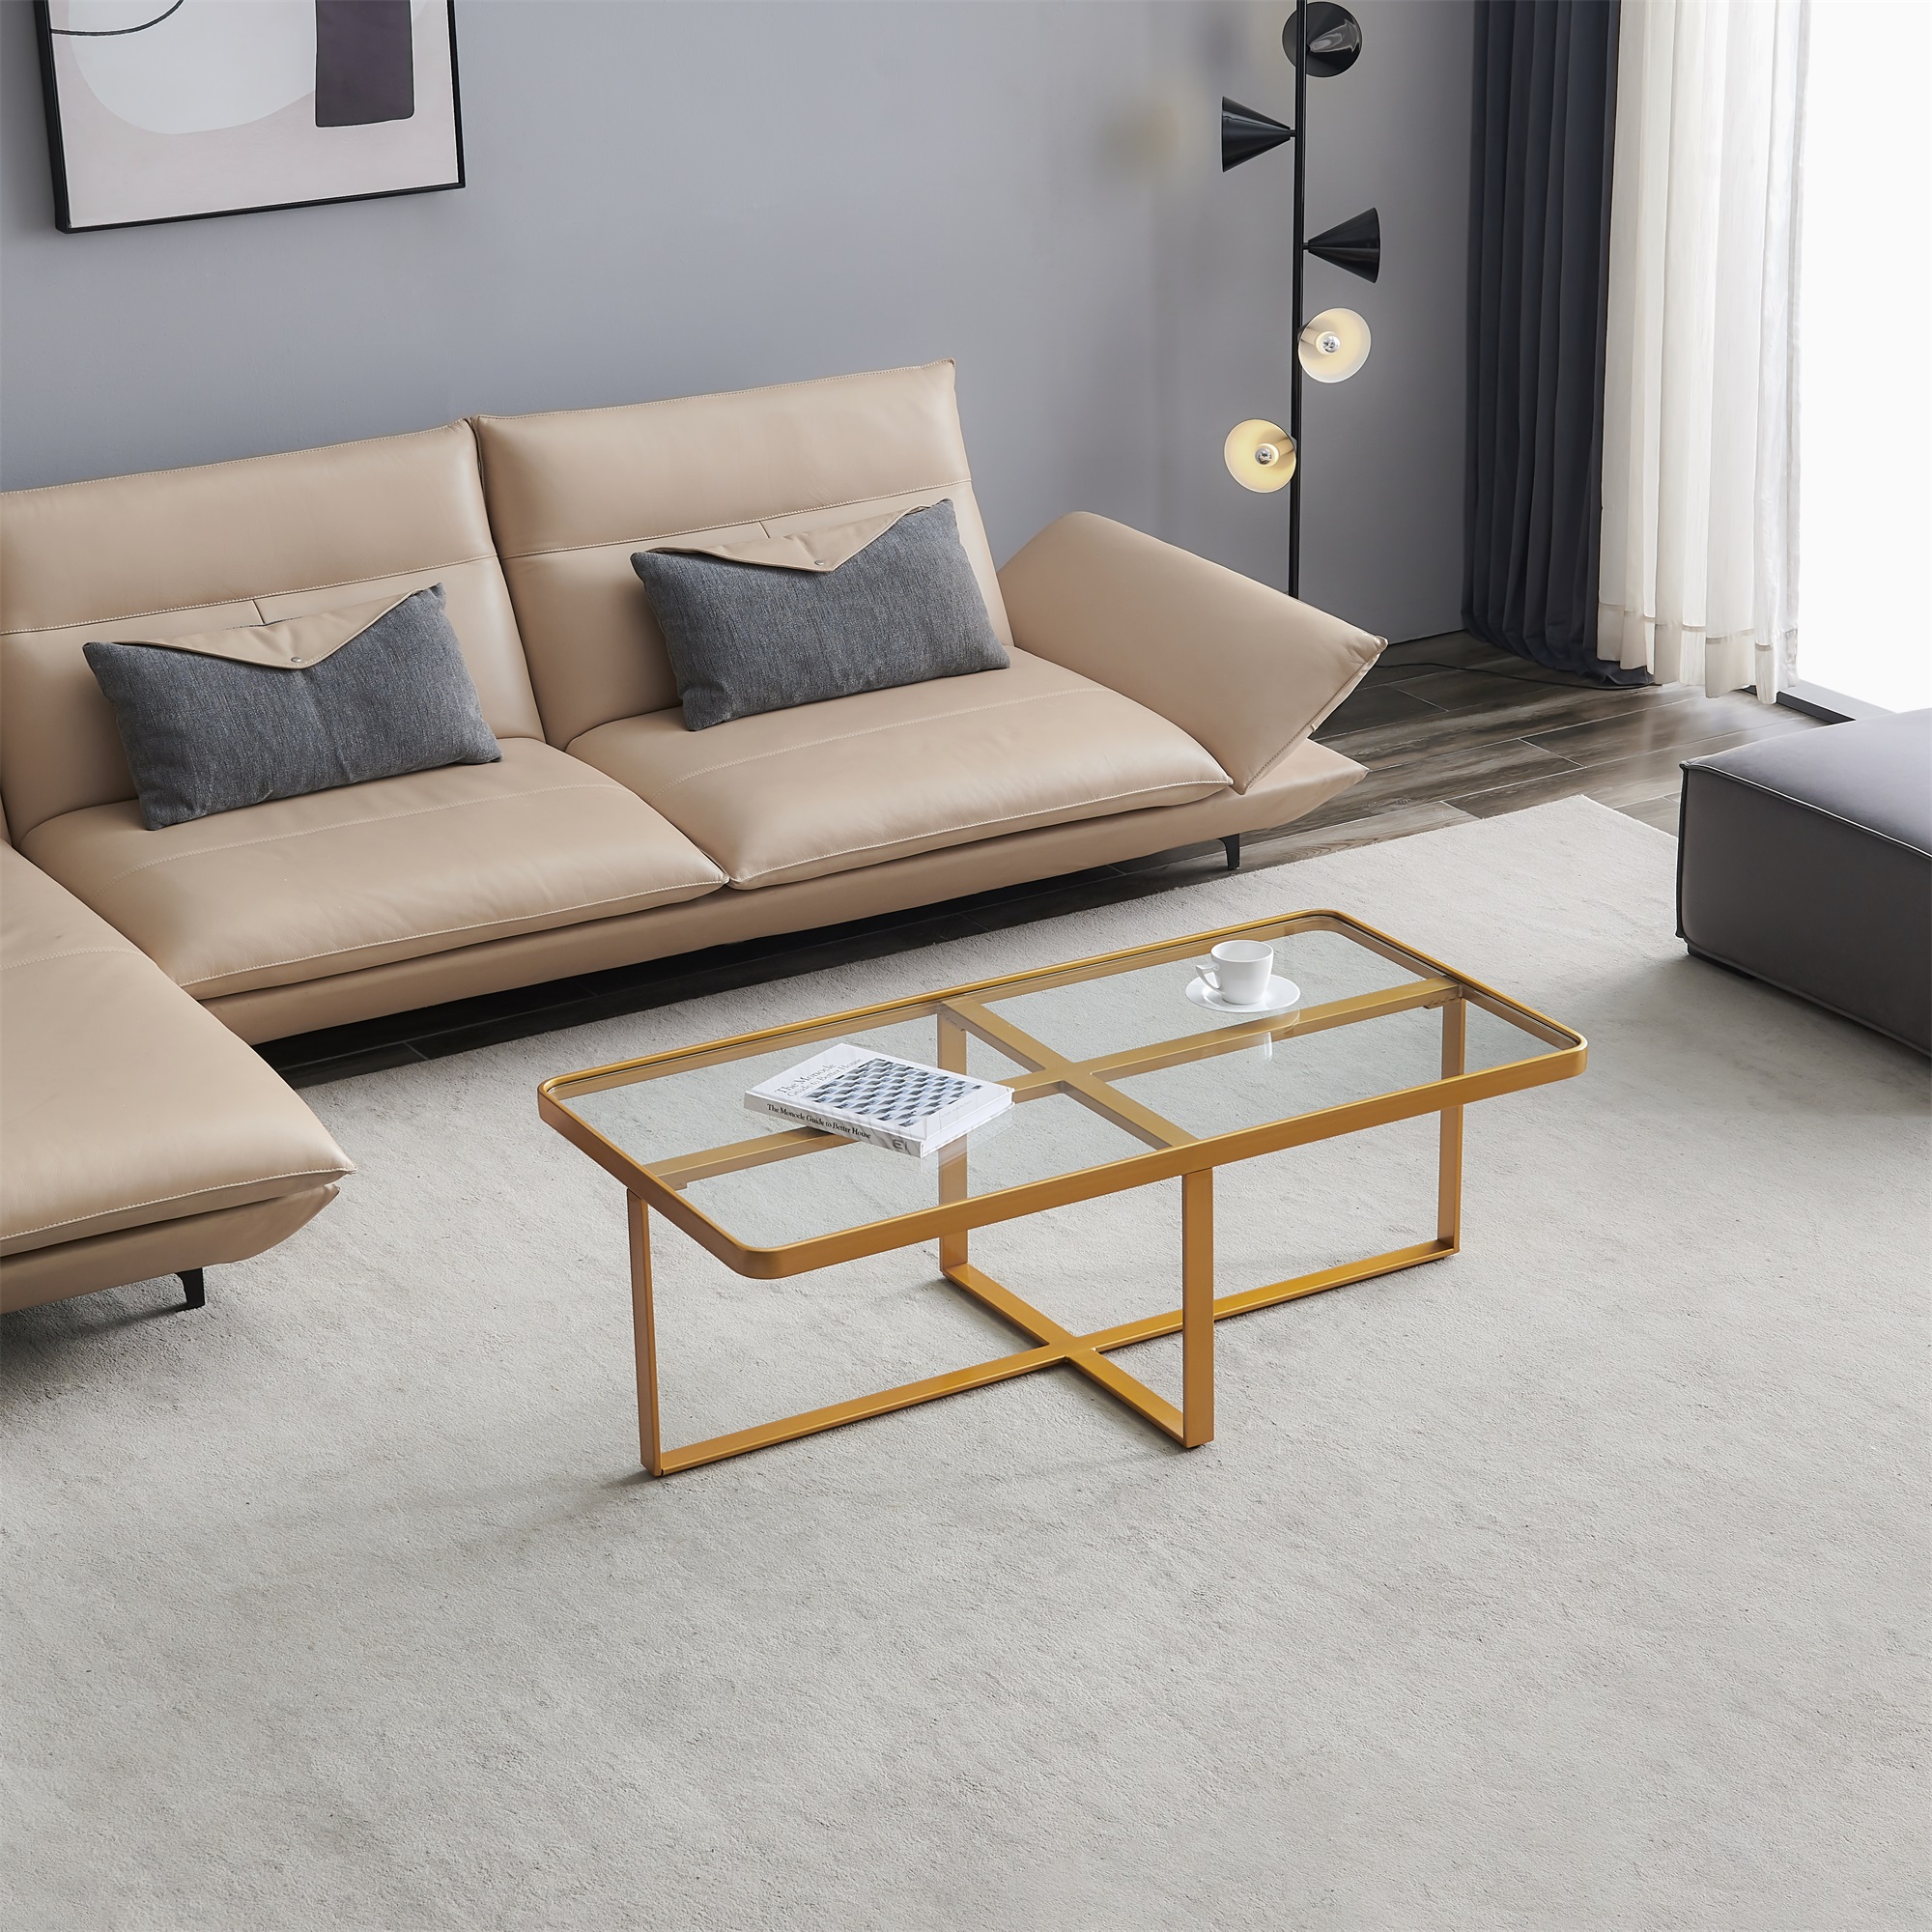 Minimalism rectangle coffee table,Golden metal frame with tempered glass tabletop-Boyel Living